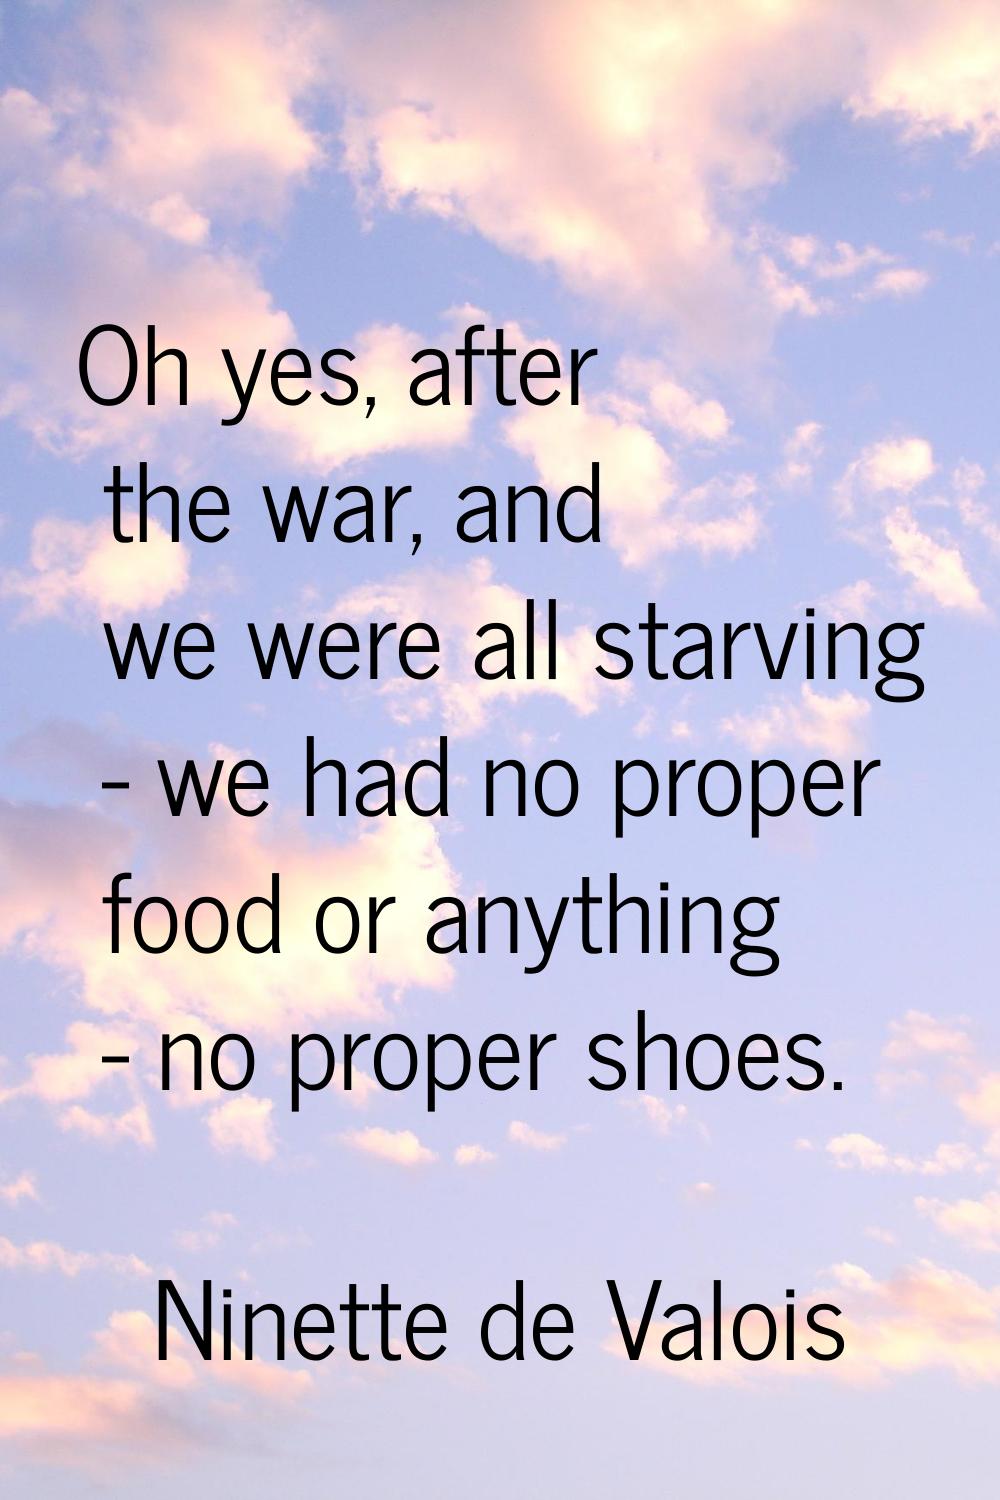 Oh yes, after the war, and we were all starving - we had no proper food or anything - no proper sho